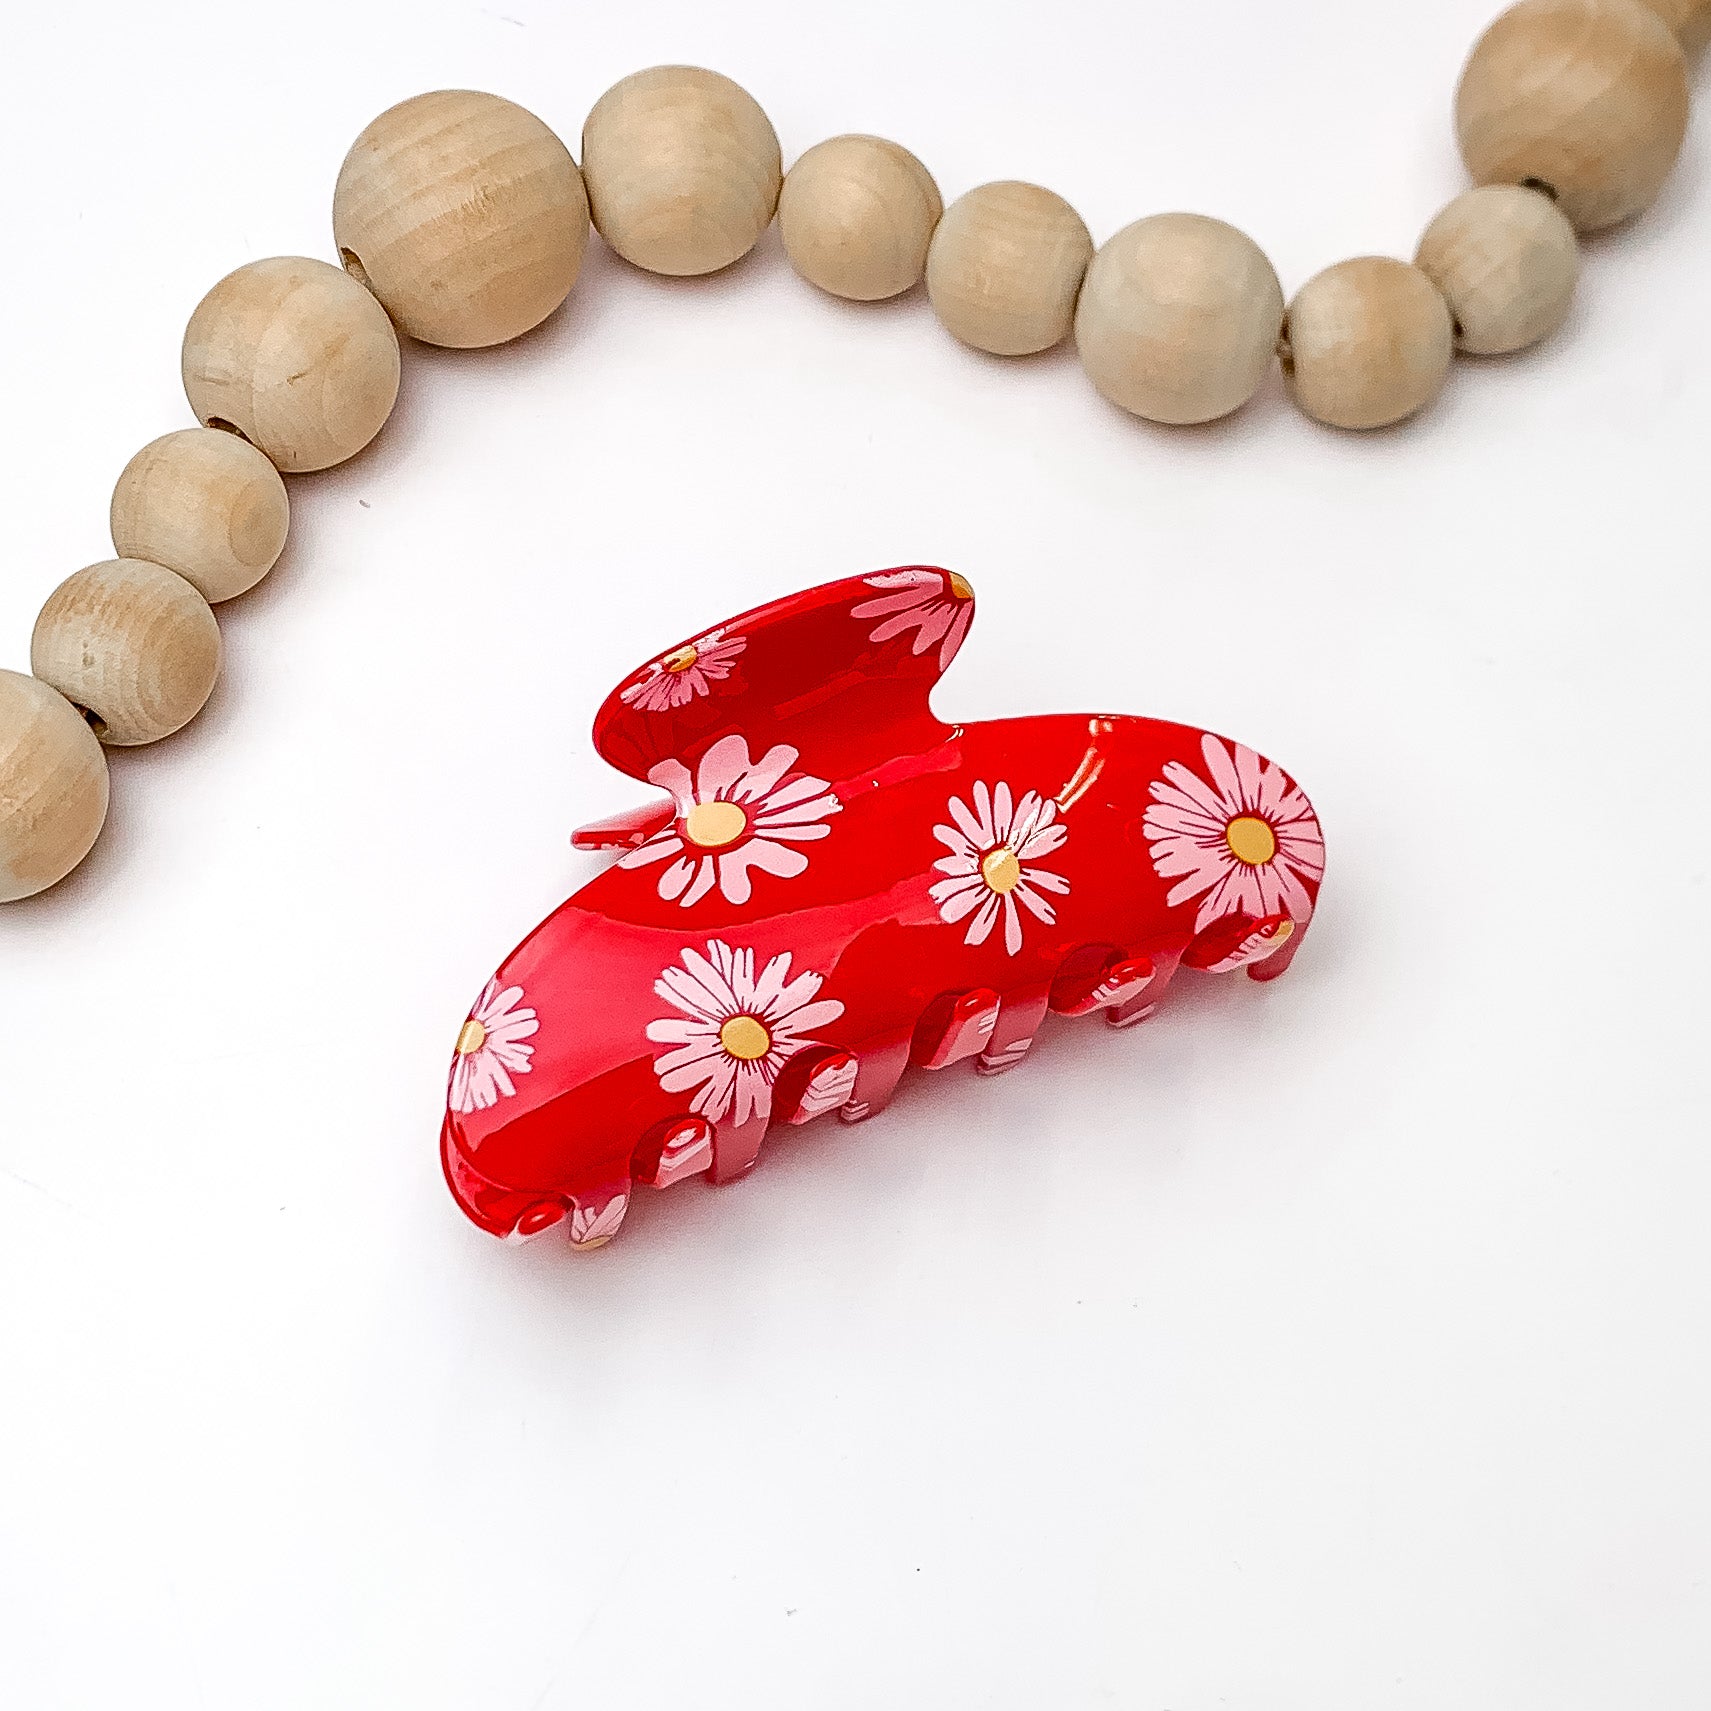 Flower Fields Hair Clip in Red. Pictured on a white background with wood beads above the hair clip.